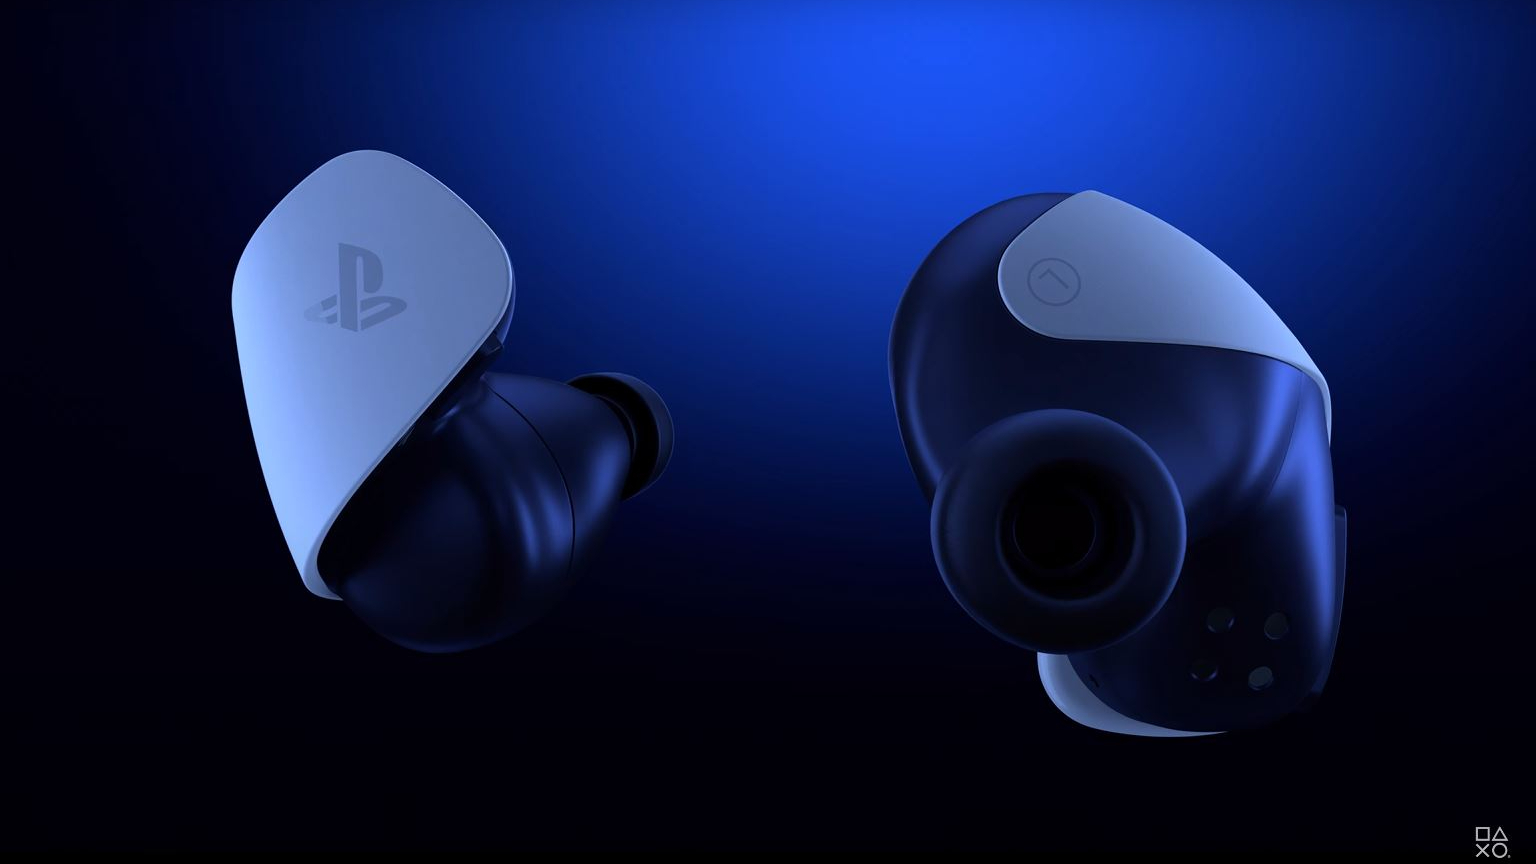 Sony's PS5 Showcase: How to watch, pricing and launch date expected - CNET